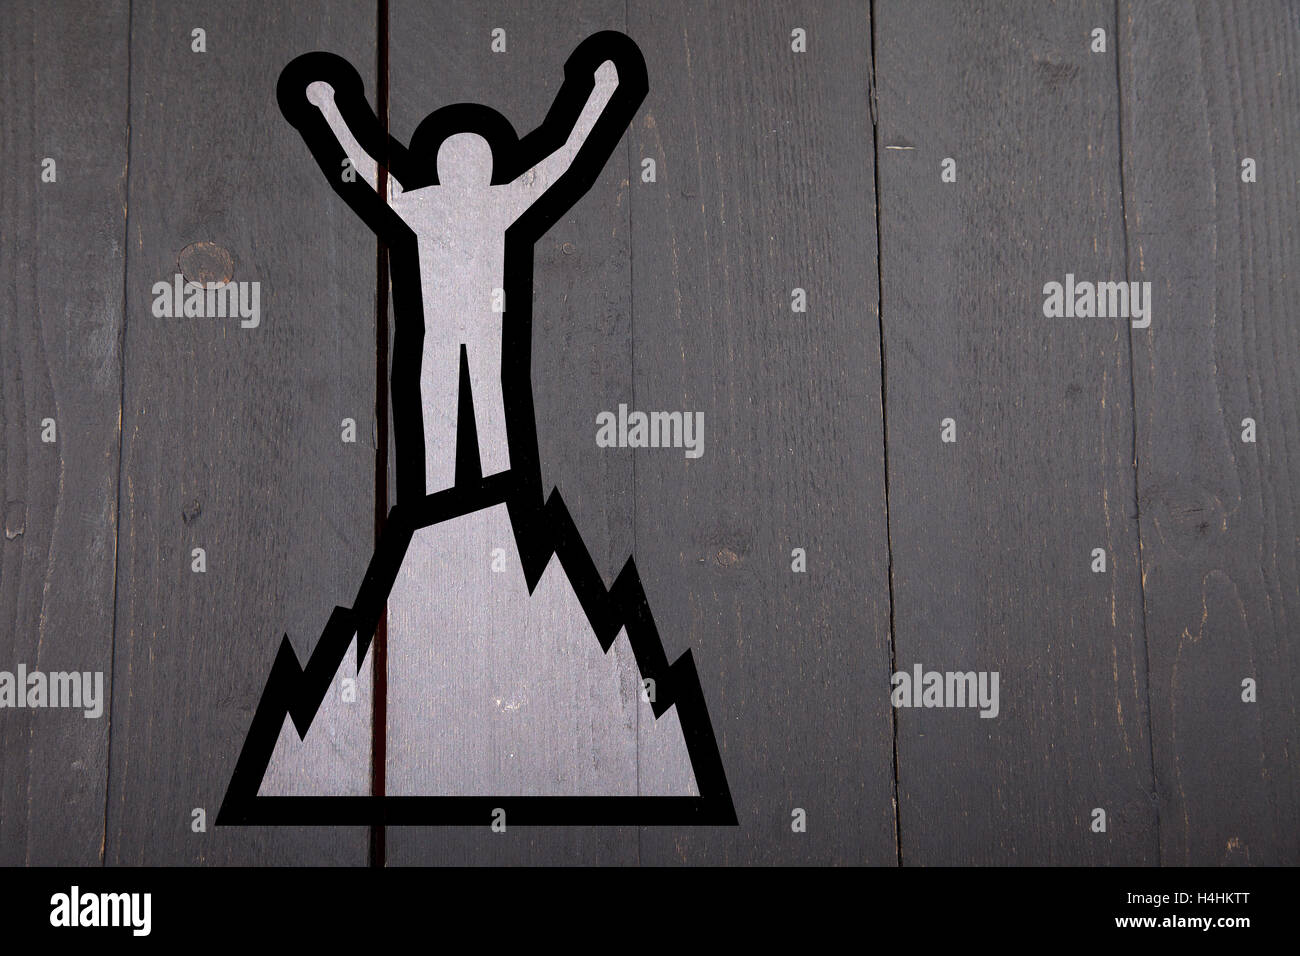 Illustration of man on top of mountain on black wooden background Stock Photo